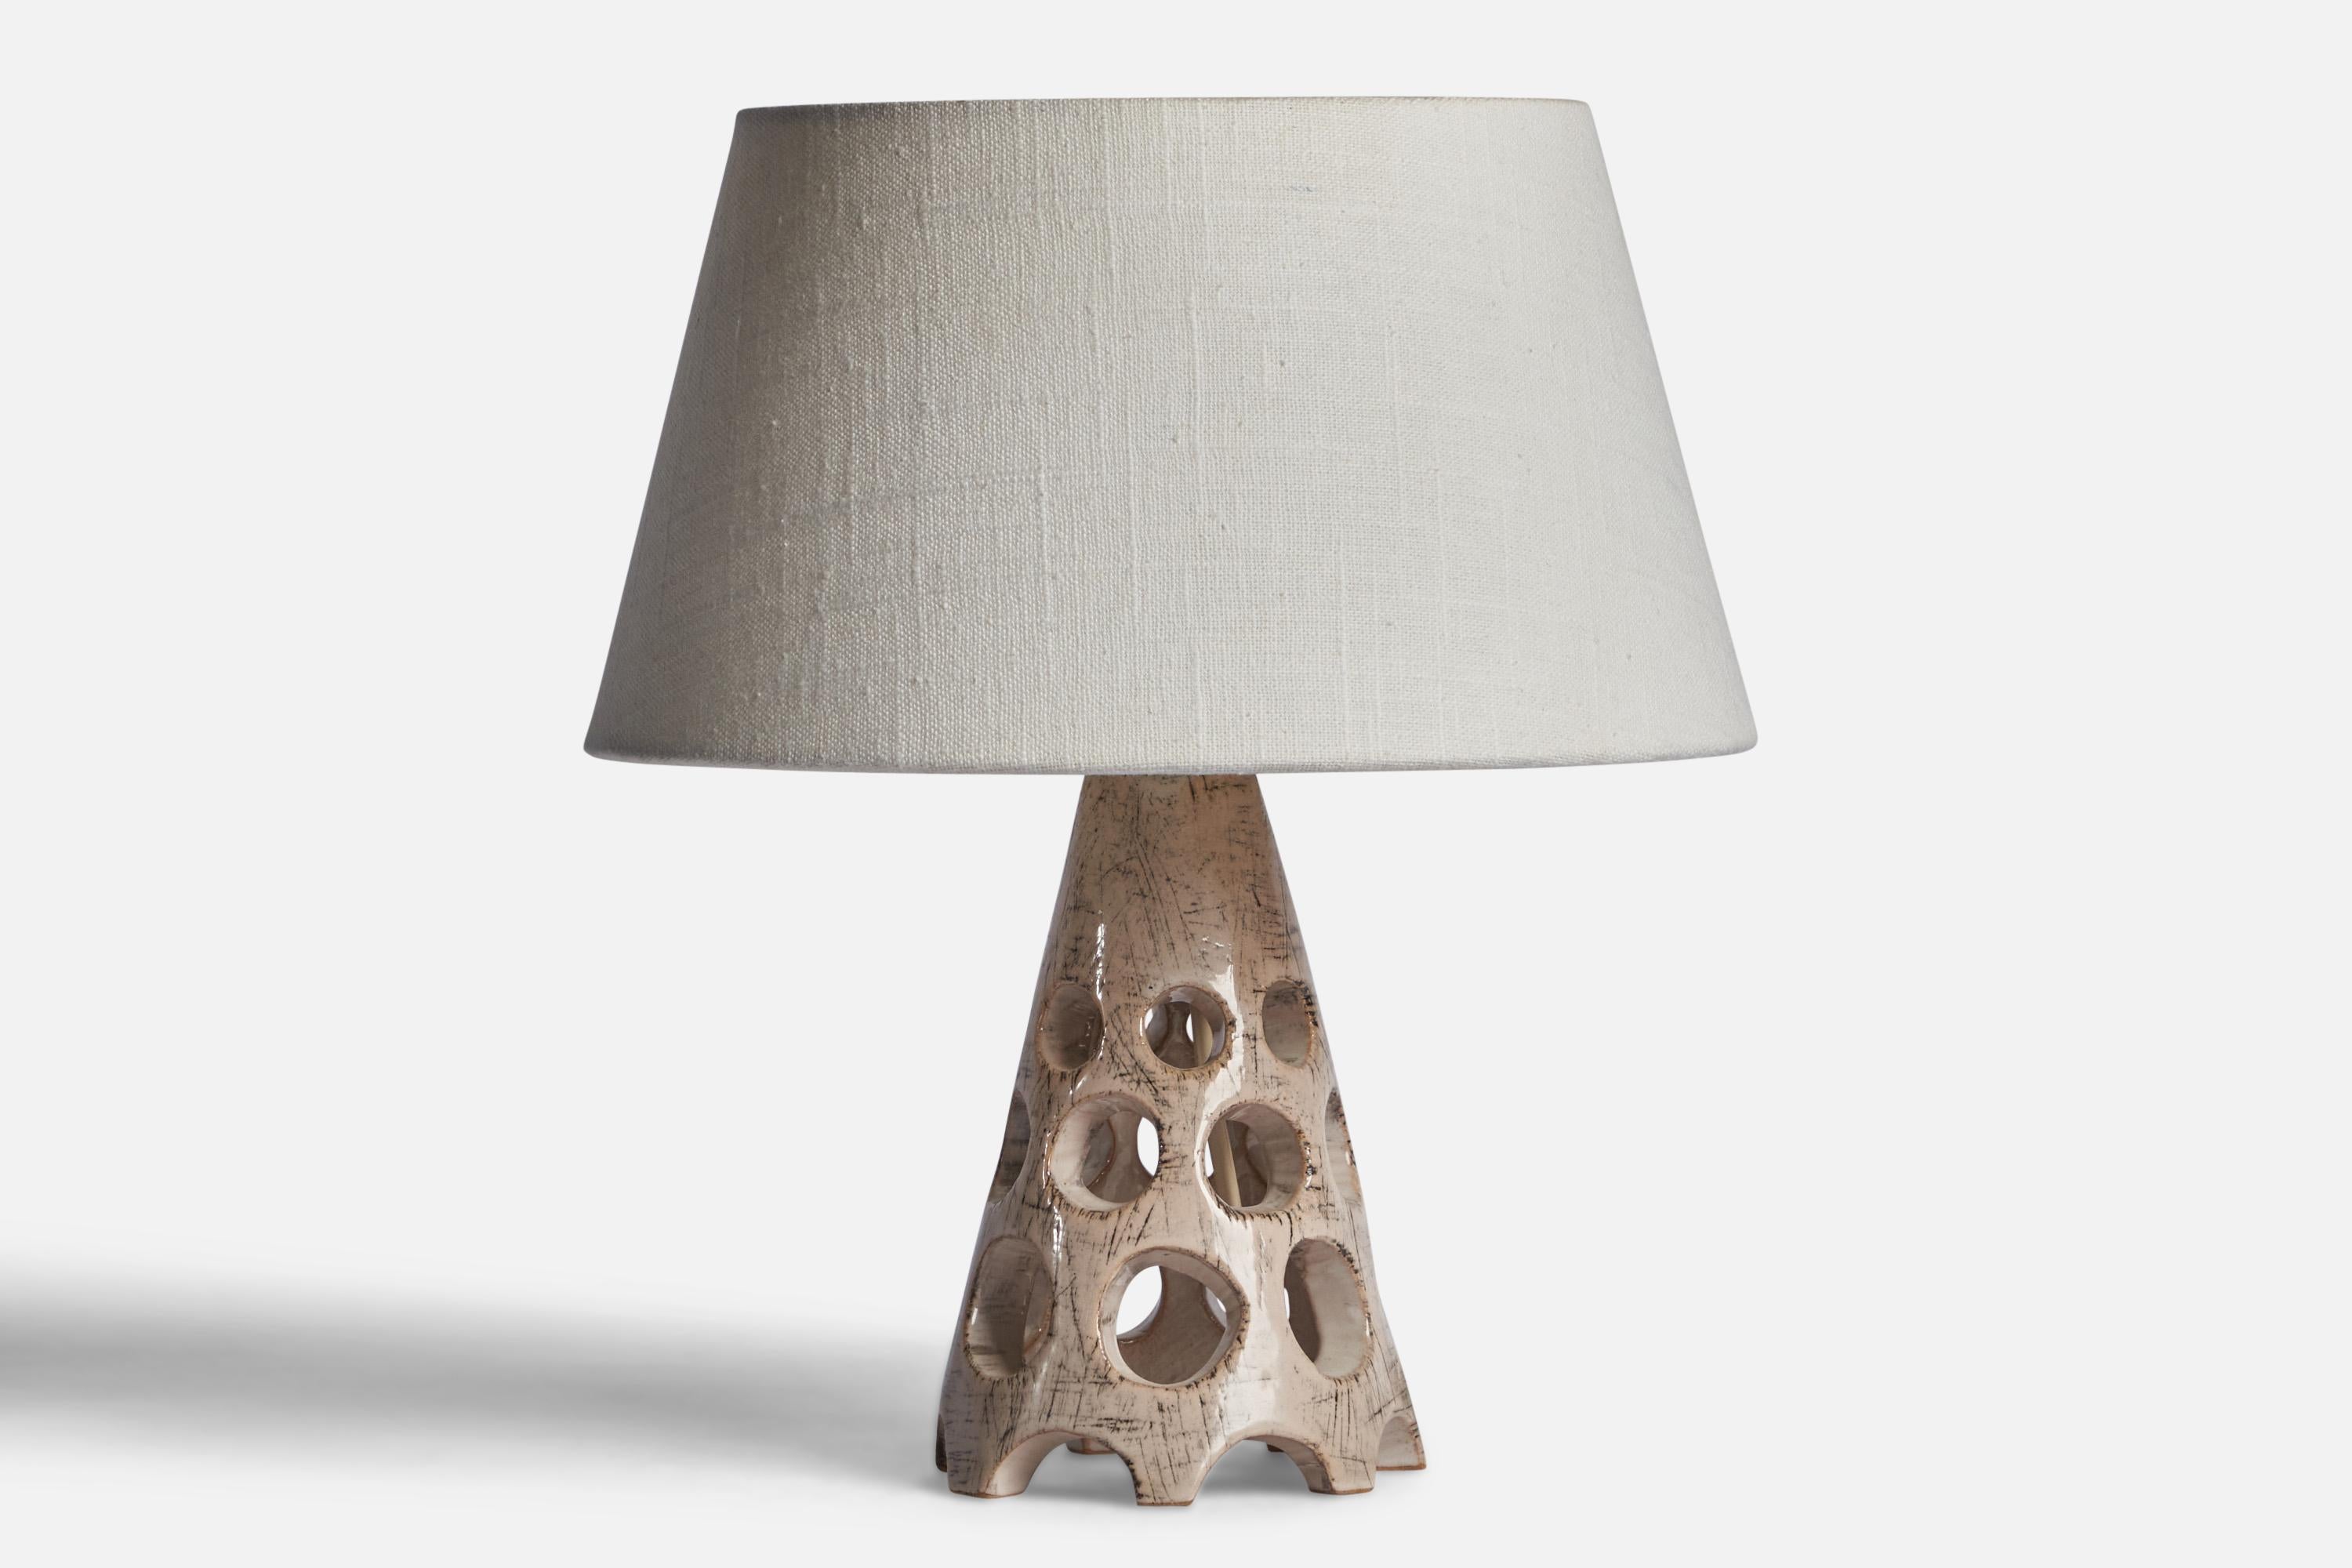 A grey-glazed stoneware table lamp designed and produced by Michael Andersen, Bornholm, Denmark, c. 1960s.

Dimensions of Lamp (inches): 8.5” H x 4.25” Diameter
Dimensions of Shade (inches): 7” Top Diameter x 10” Bottom Diameter x 5.5” H 
Dimensions